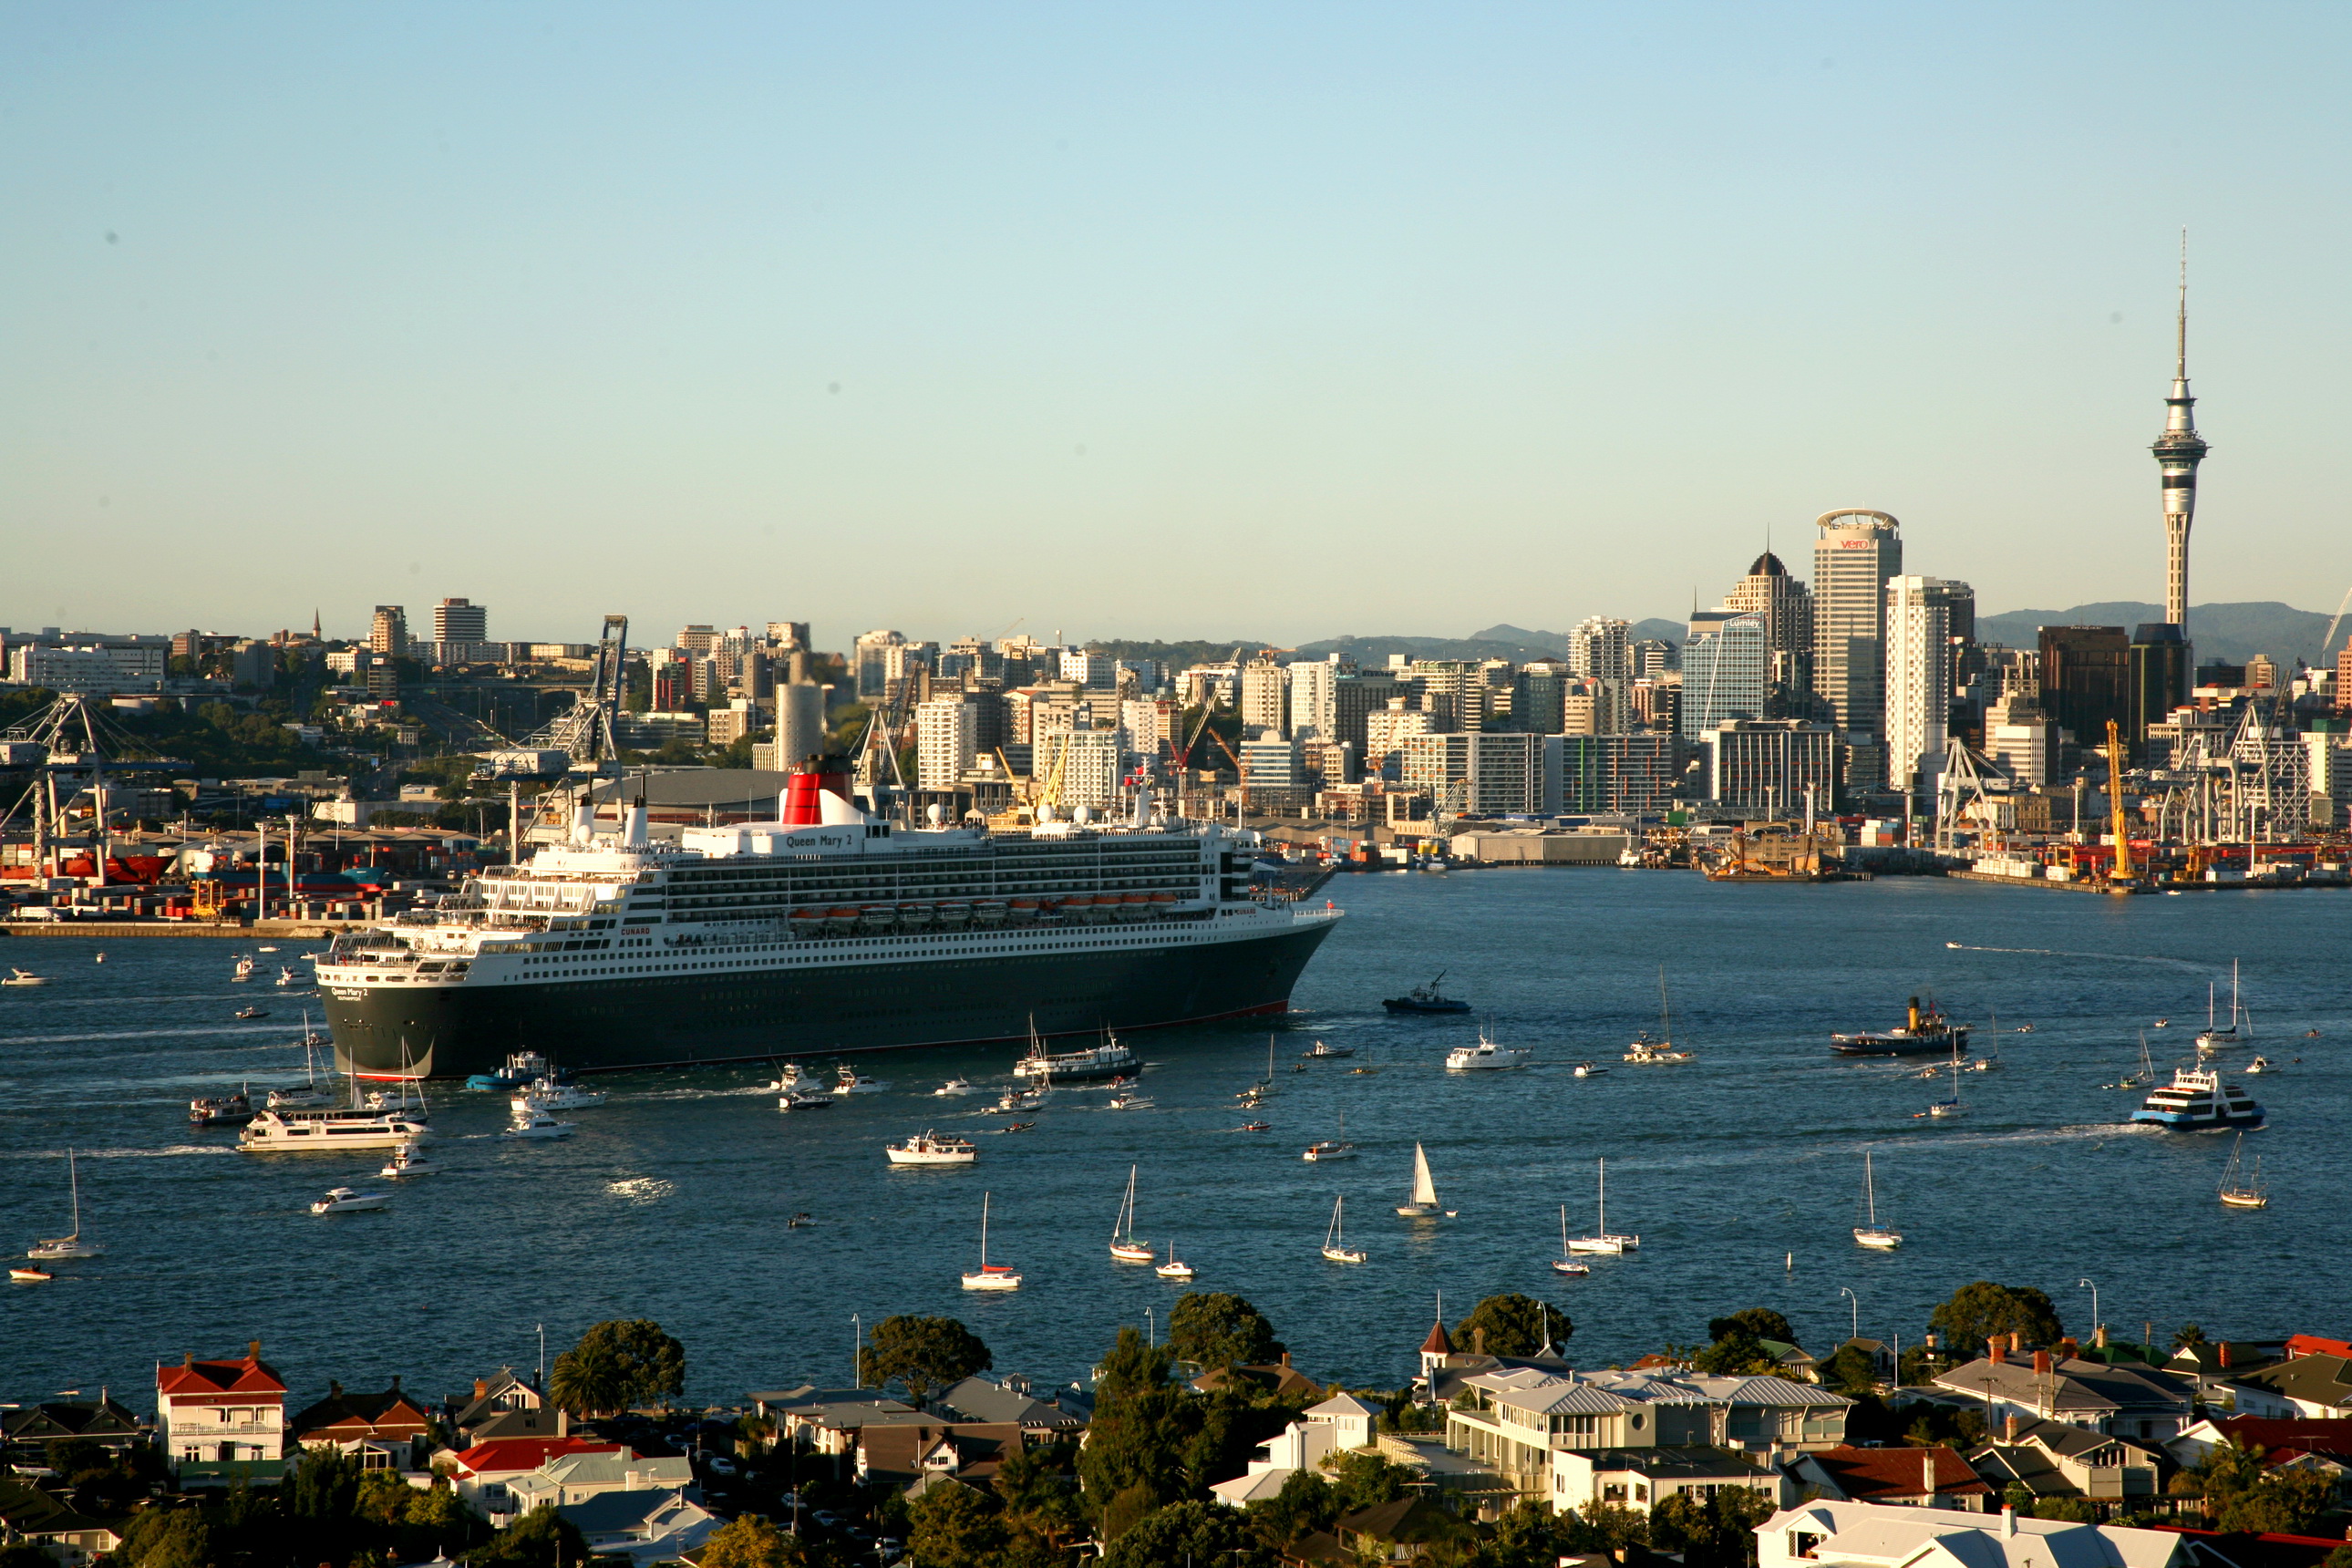 Auckland New Zealand Rms Queen Mary 2 2580x1720